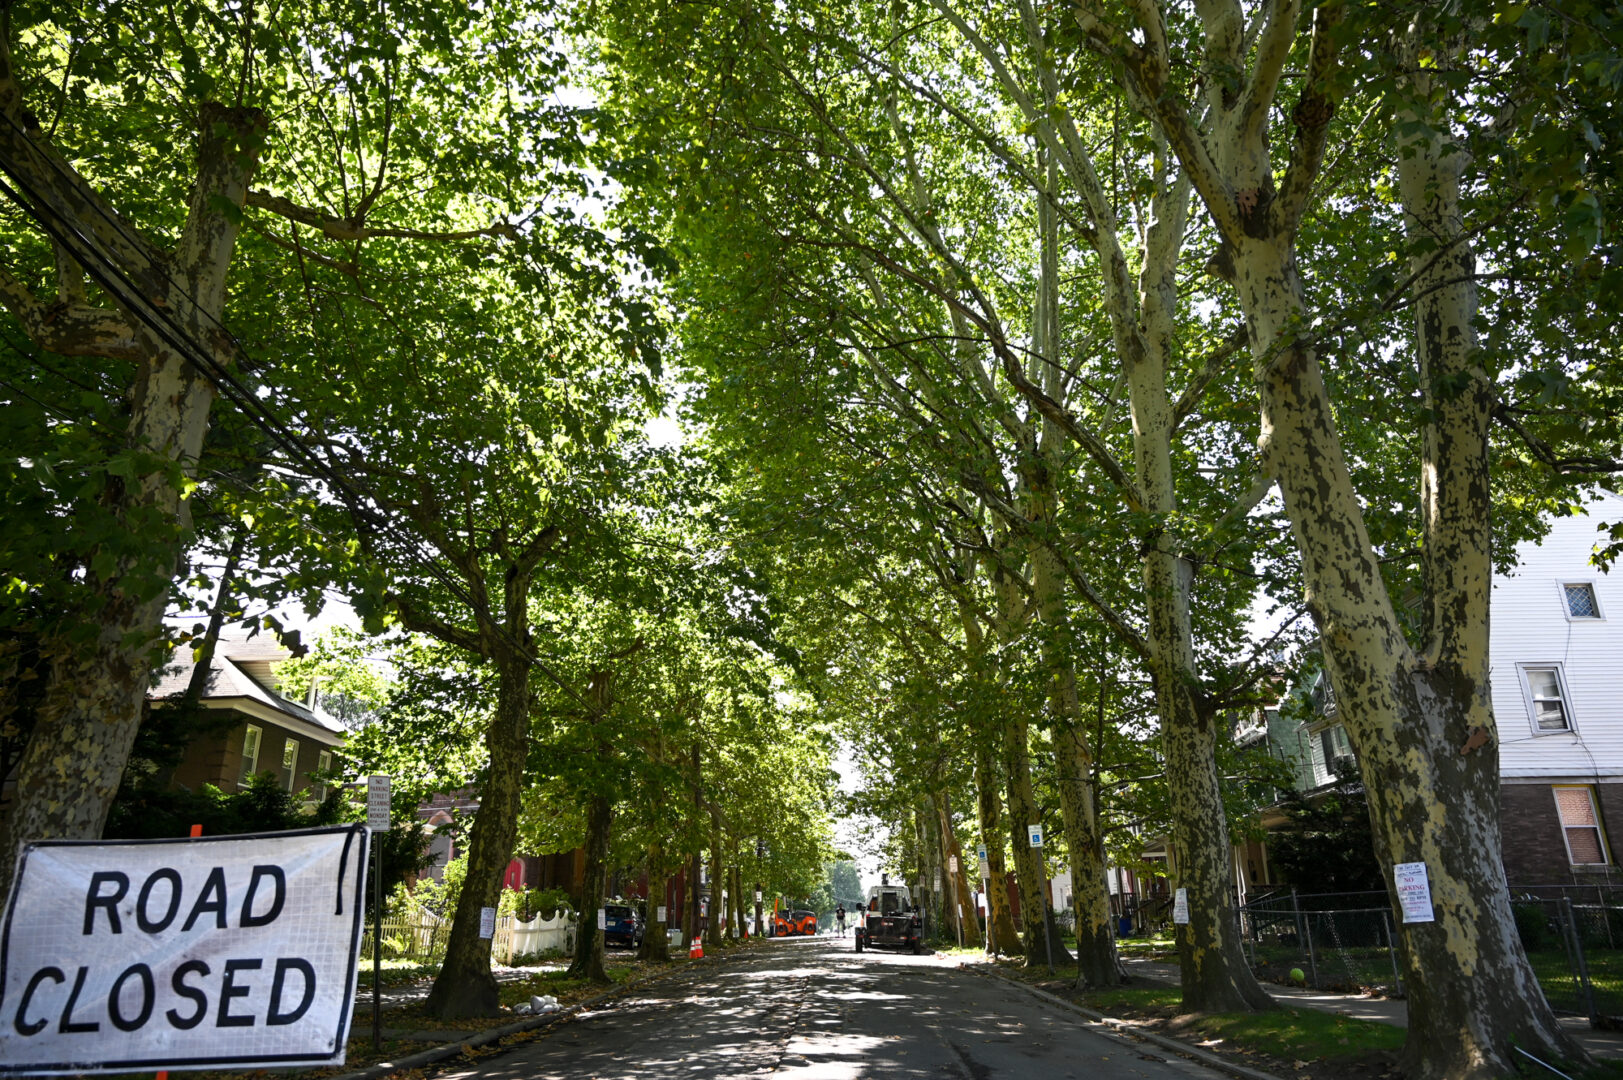 Trees in the 700 block of North 16th Street in Harrisburg on August 2, 2022.